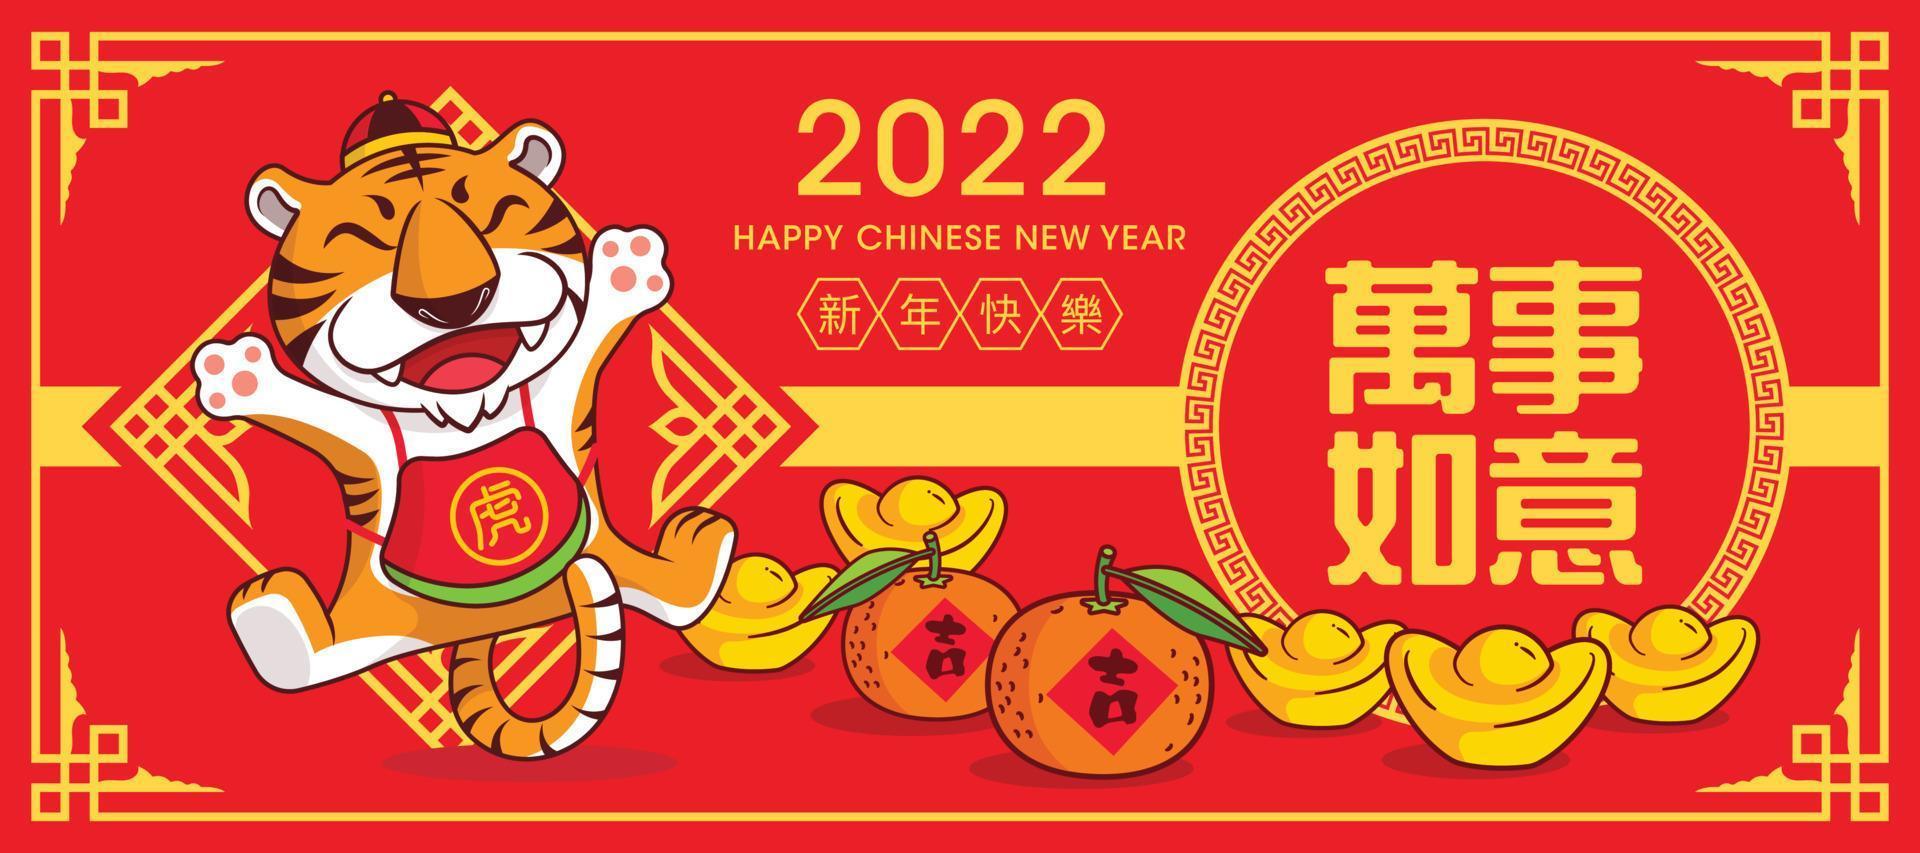 2022 CNY banner with gold ingot and mandarin orange. Cute tiger with chinese costume jumping on paper art pattern background vector